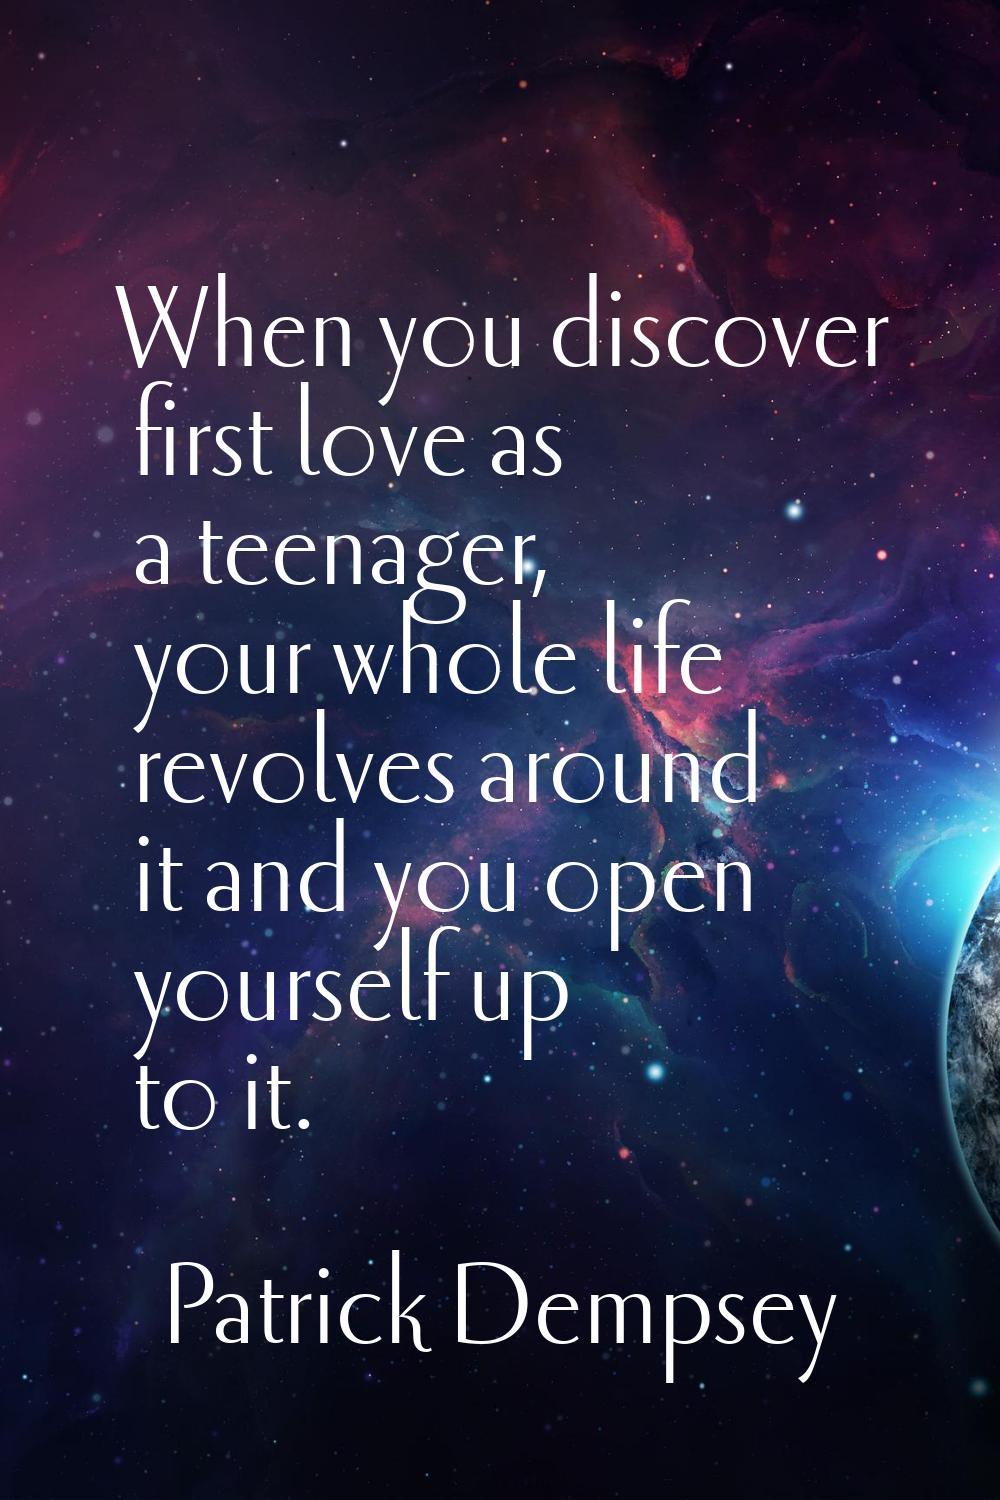 When you discover first love as a teenager, your whole life revolves around it and you open yoursel